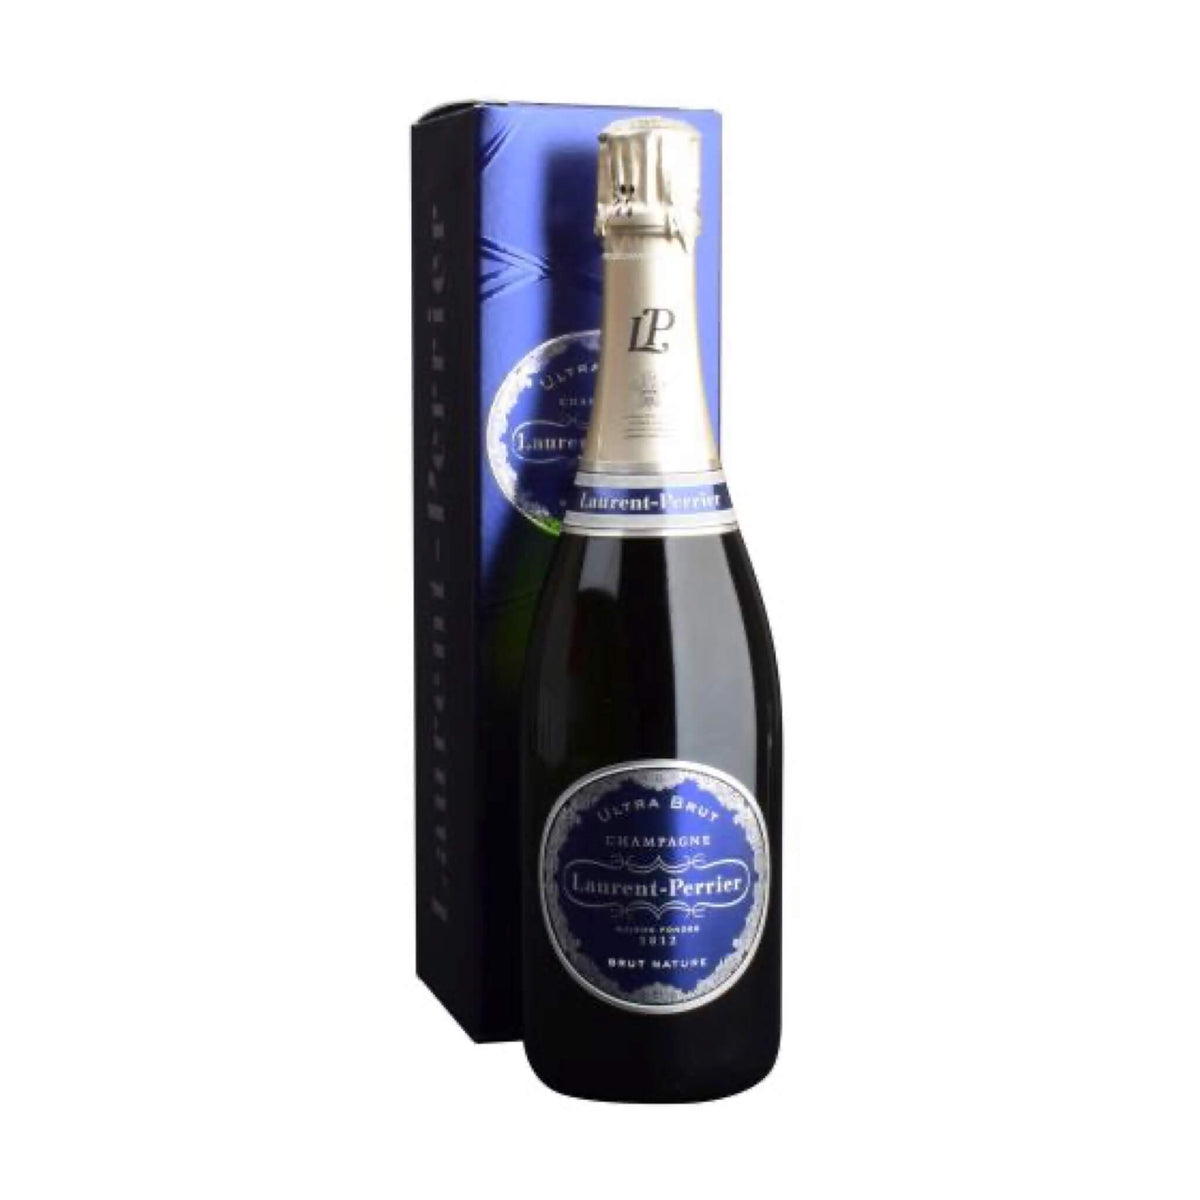 Champagne Laurent-Perrier-Champagner-Chardonnay, Pinot Noir-Ultra Brut Champagne AOC-WINECOM